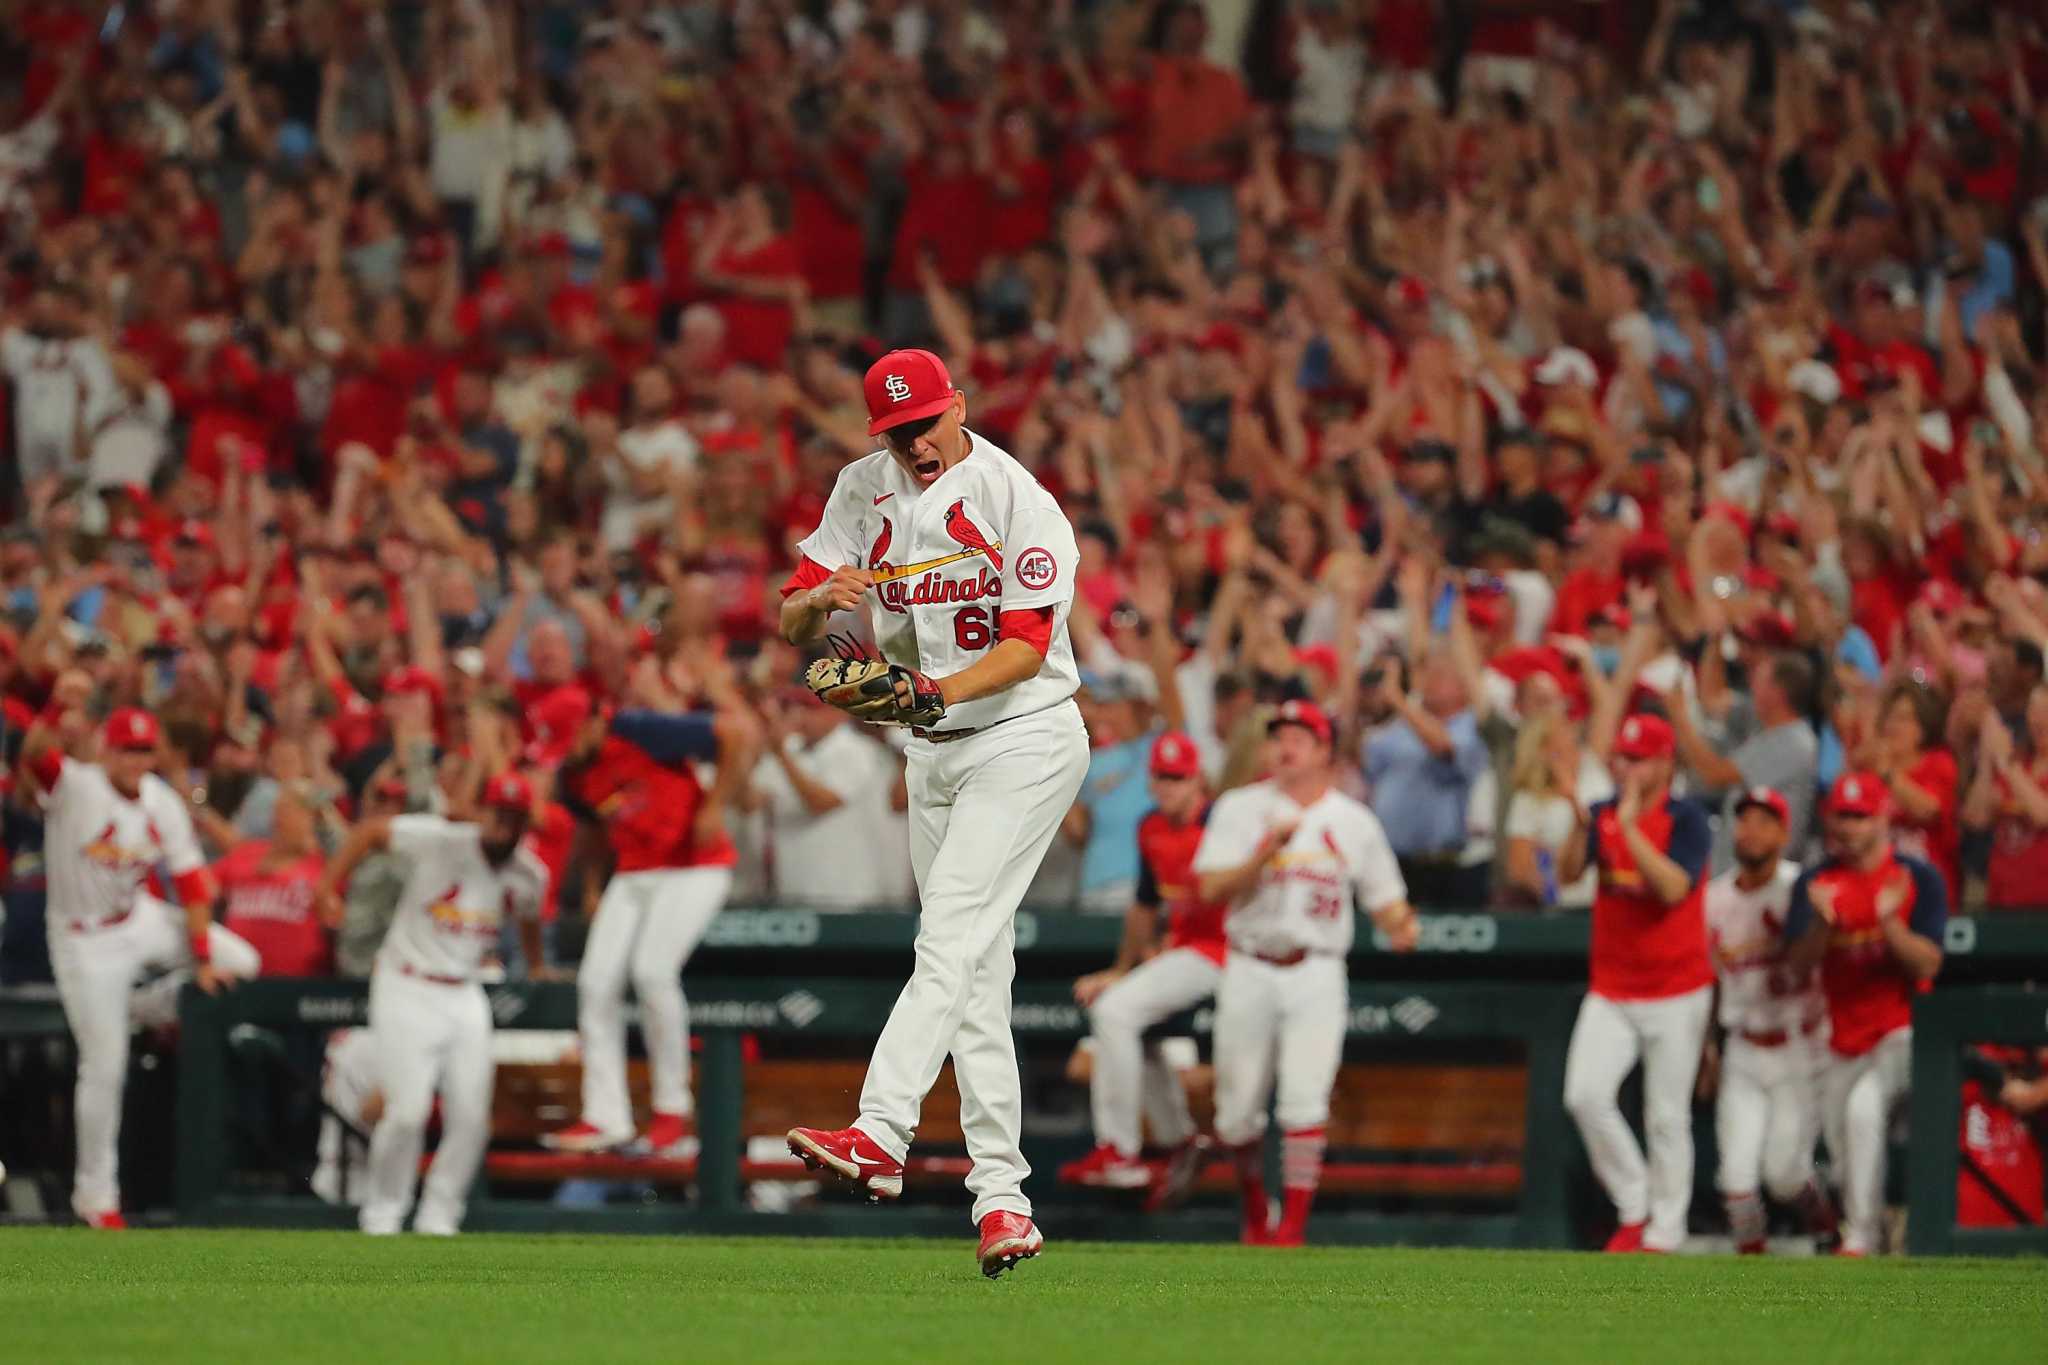 Lars Nootbaar of the St. Louis Cardinals celebrates after hitting a News  Photo - Getty Images